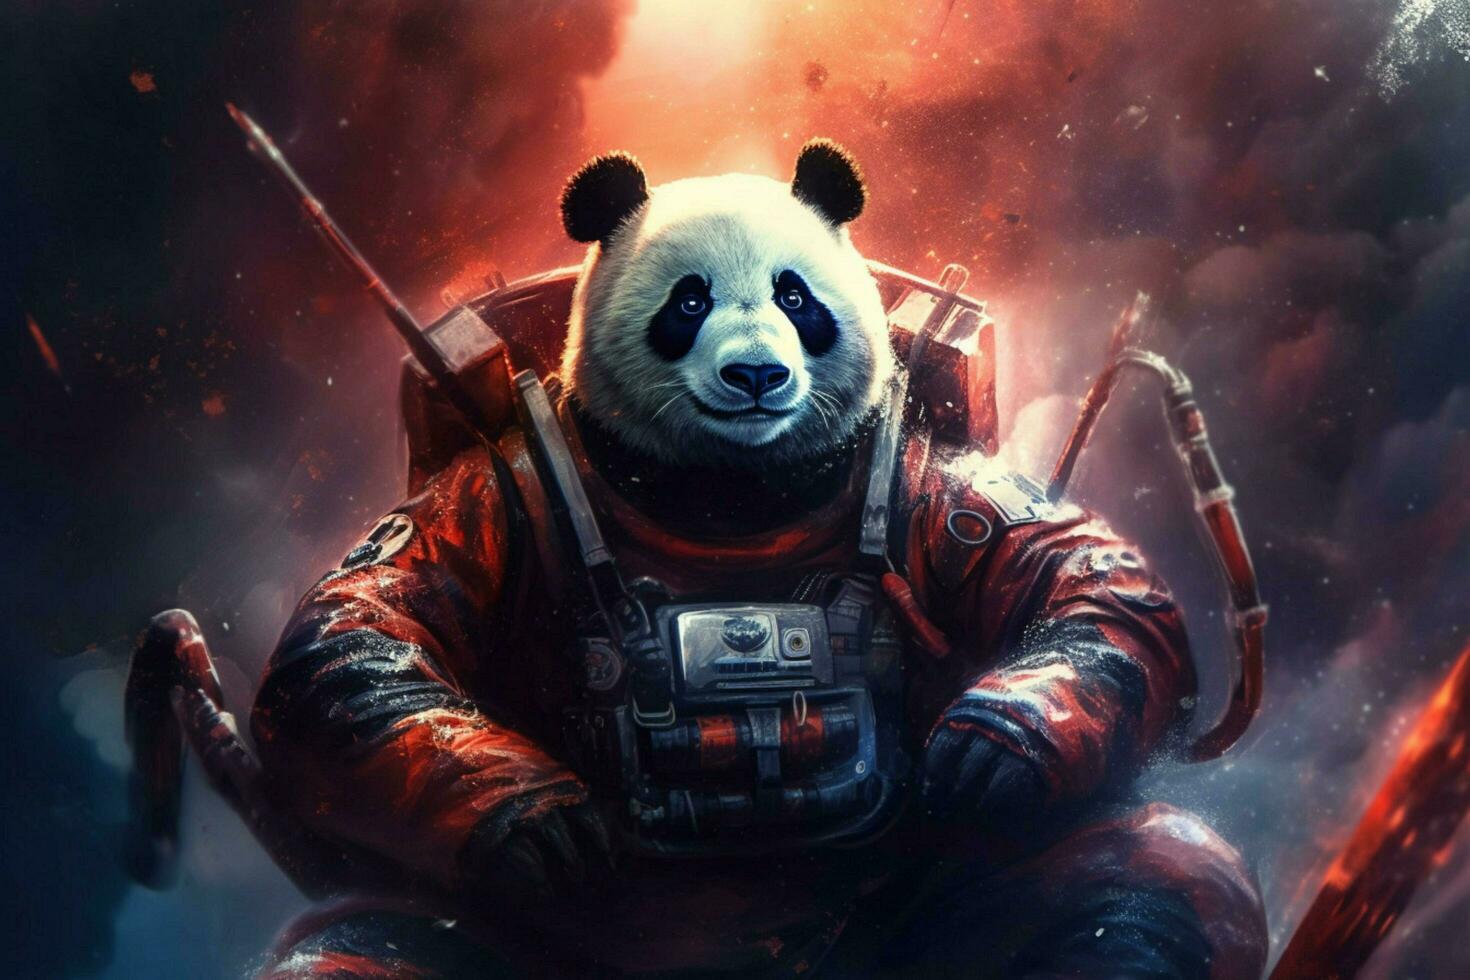 panda in a space suit photo